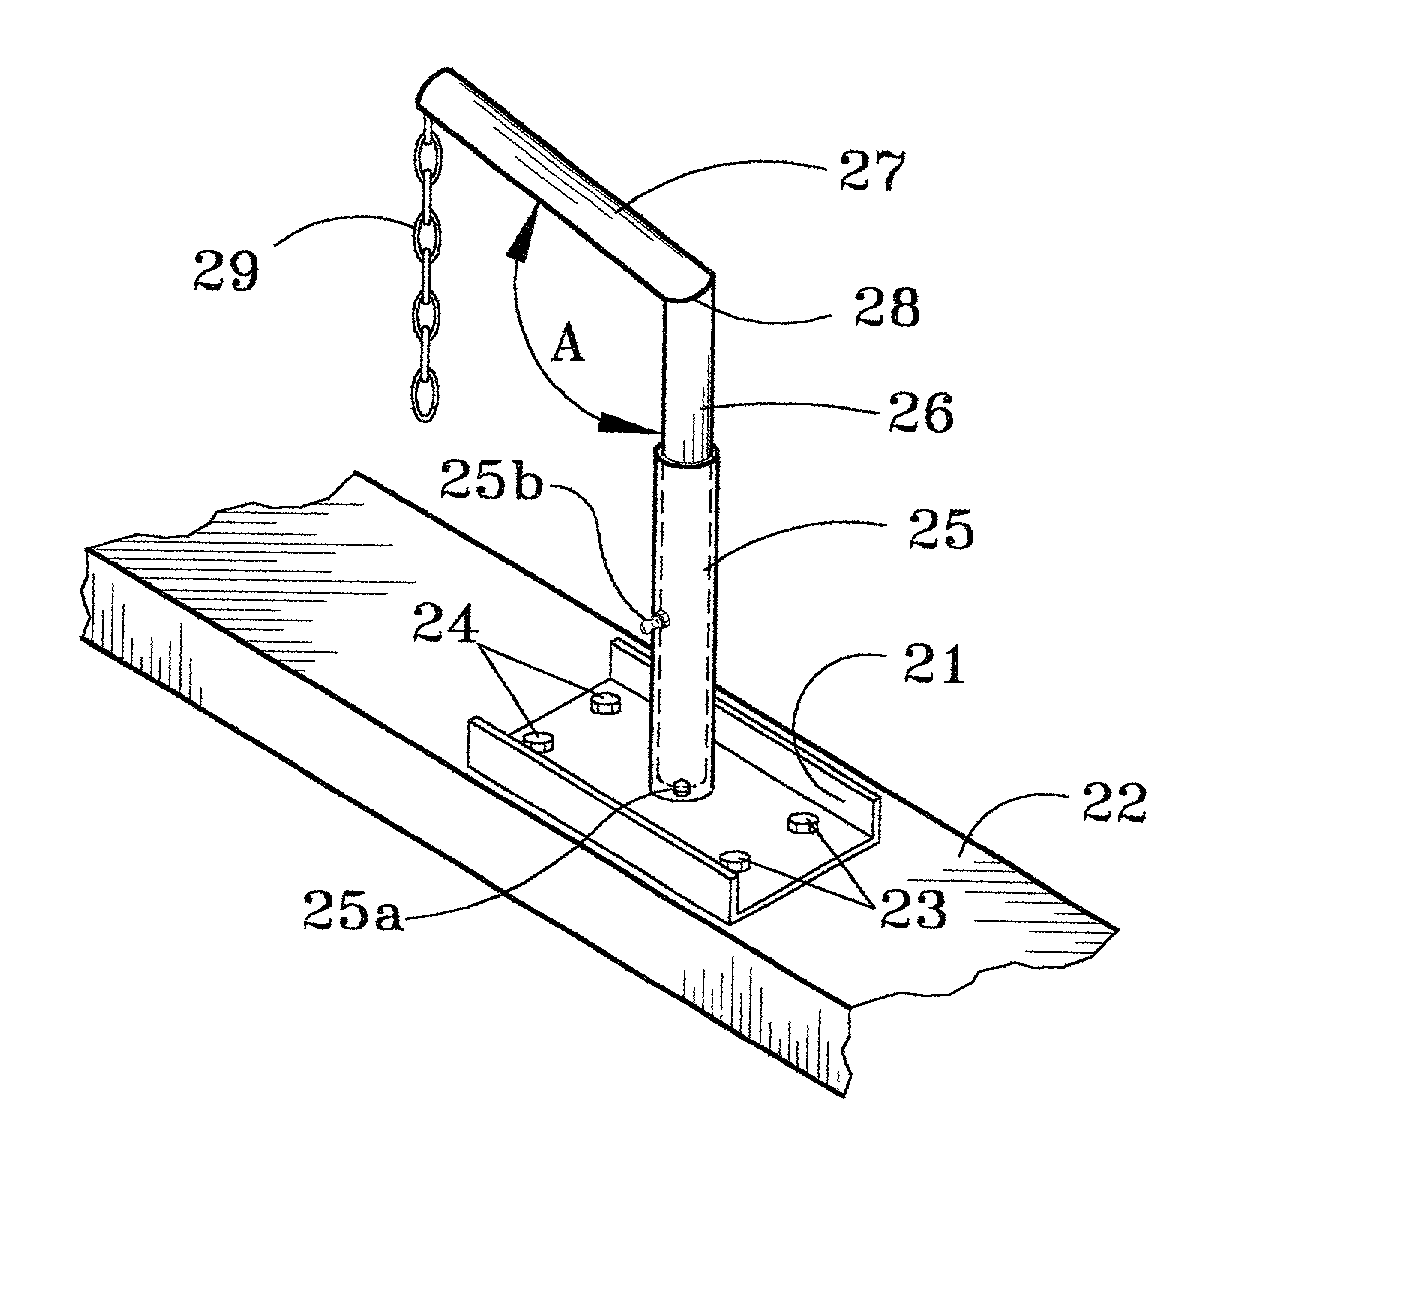 Tractor-trailer support apparatus